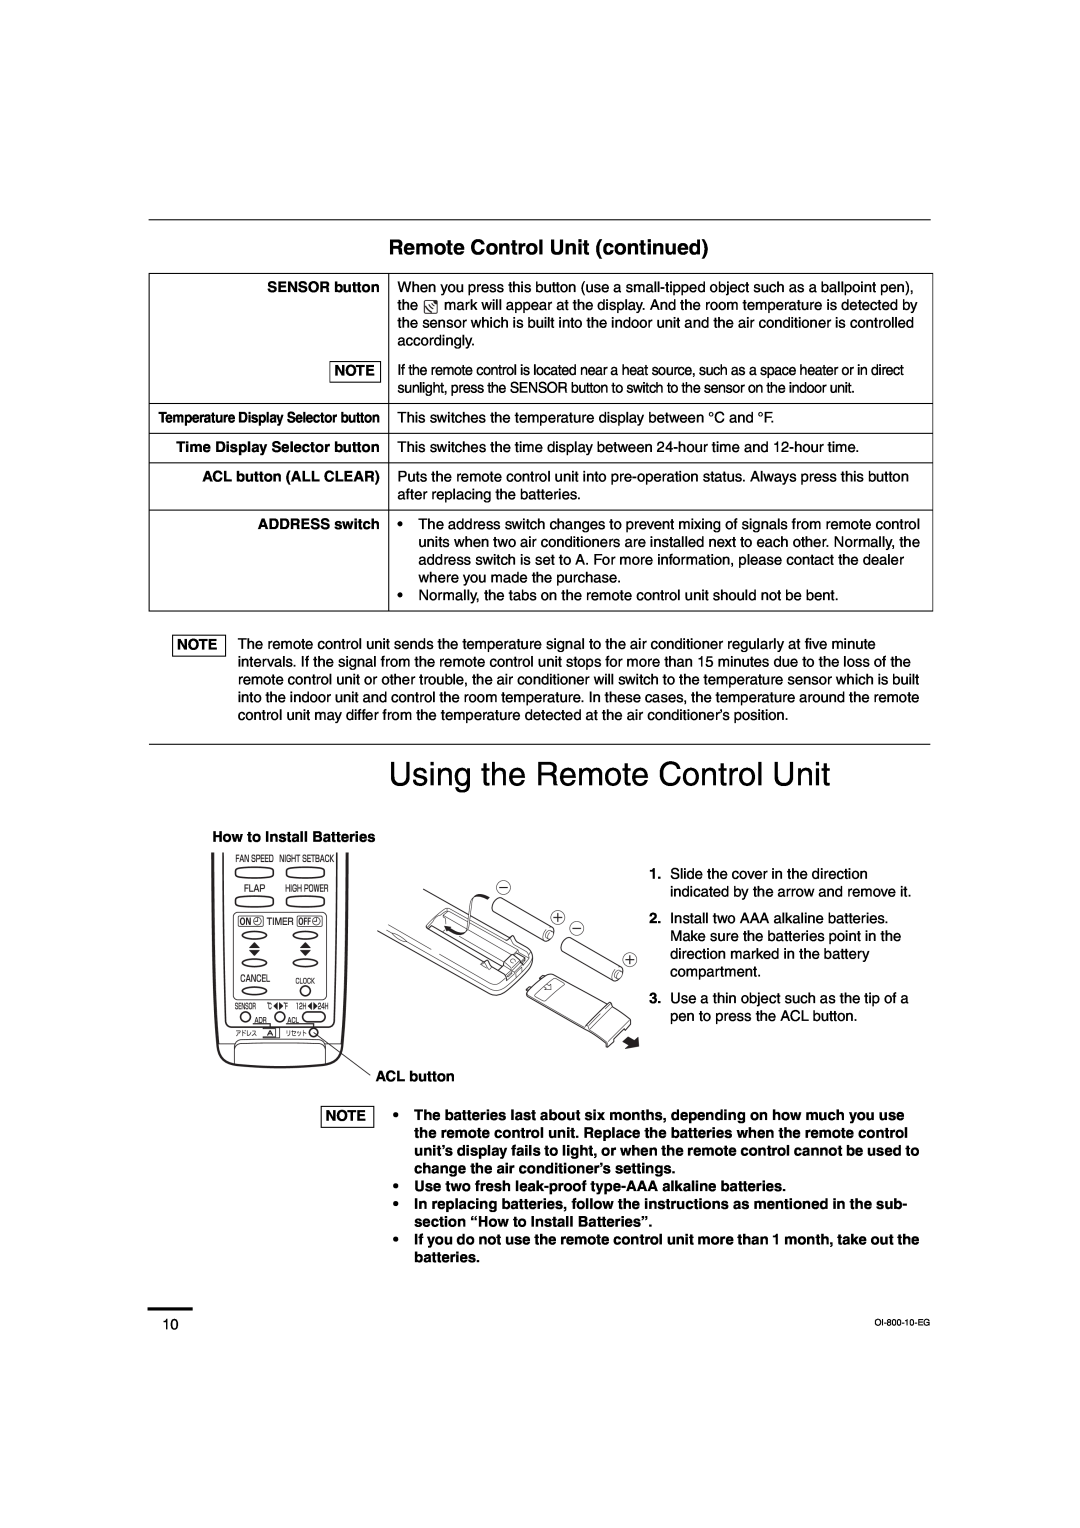 Sanyo C1872, C2472, CL2472, CL1872 service manual Using the Remote Control Unit, Remote Control Unit continued 